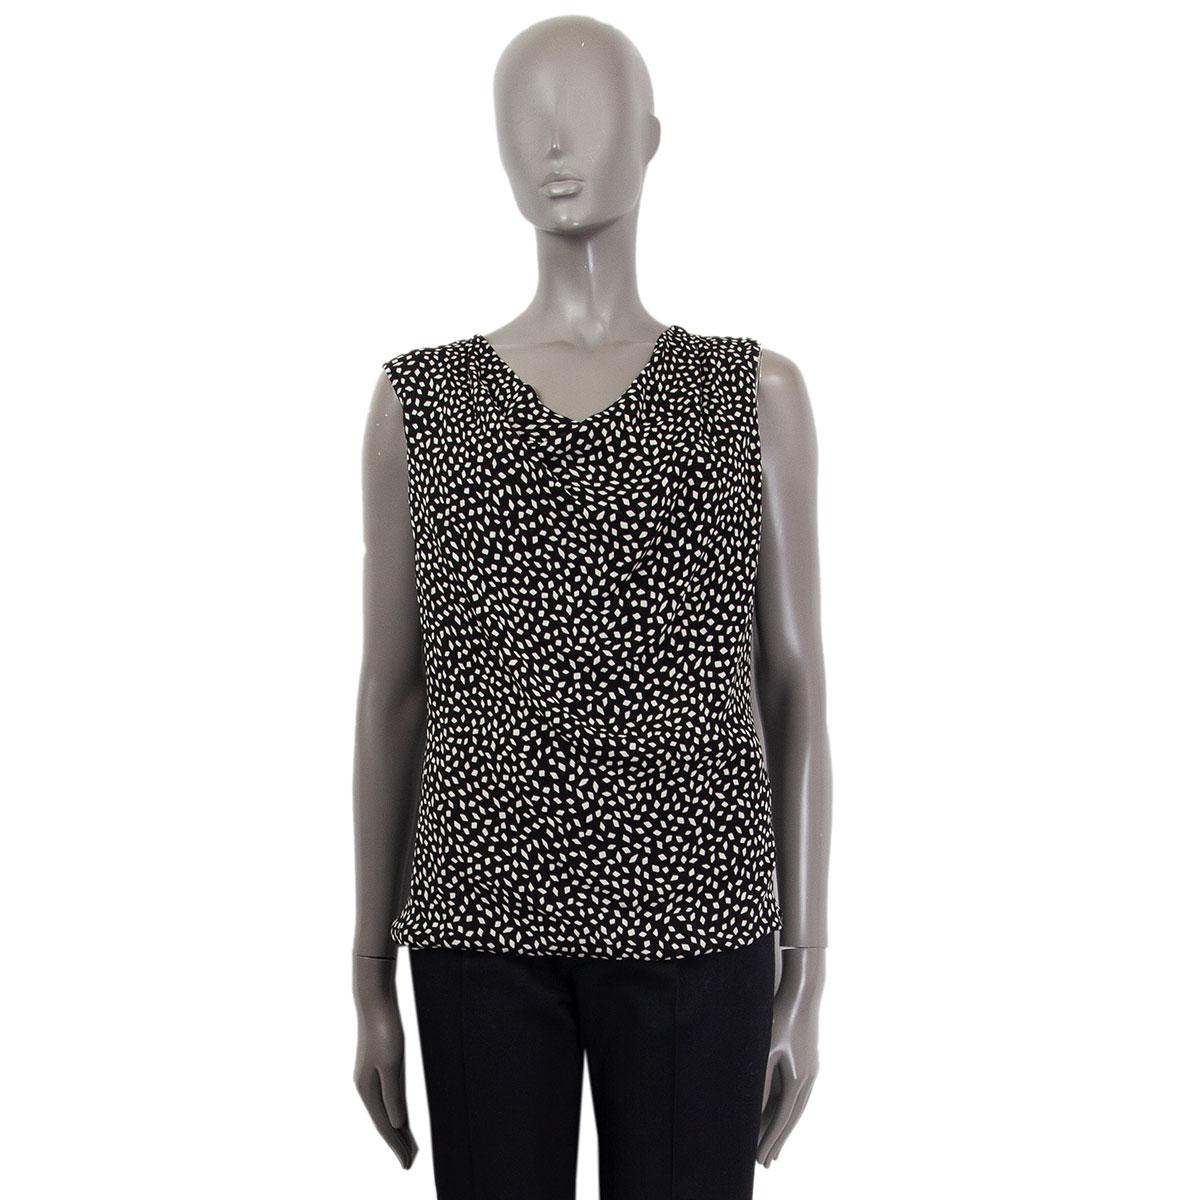 Saint Laurent sleeveless cowl neck top in black and off-white printed viscose (100%) and black silk (100%) lining. Opens with a zipper on the back. Has been worn and is in excellent condition.  

Tag Size 36 
Size XS
Shoulder Width 40cm